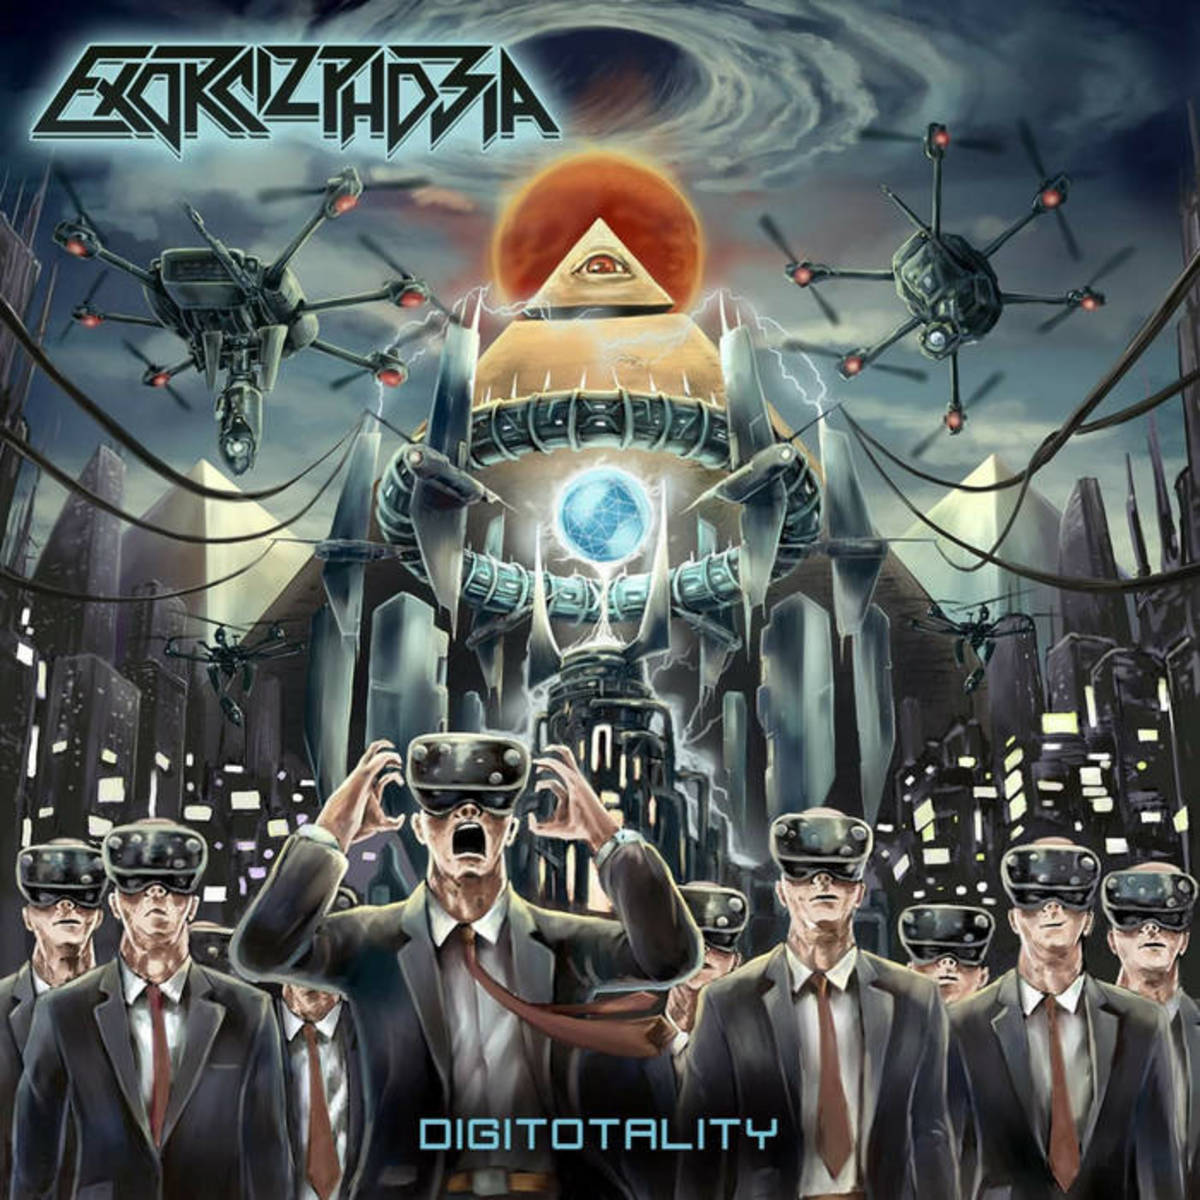 review-of-the-album-digitotality-by-thrash-metal-band-exorcizphobia